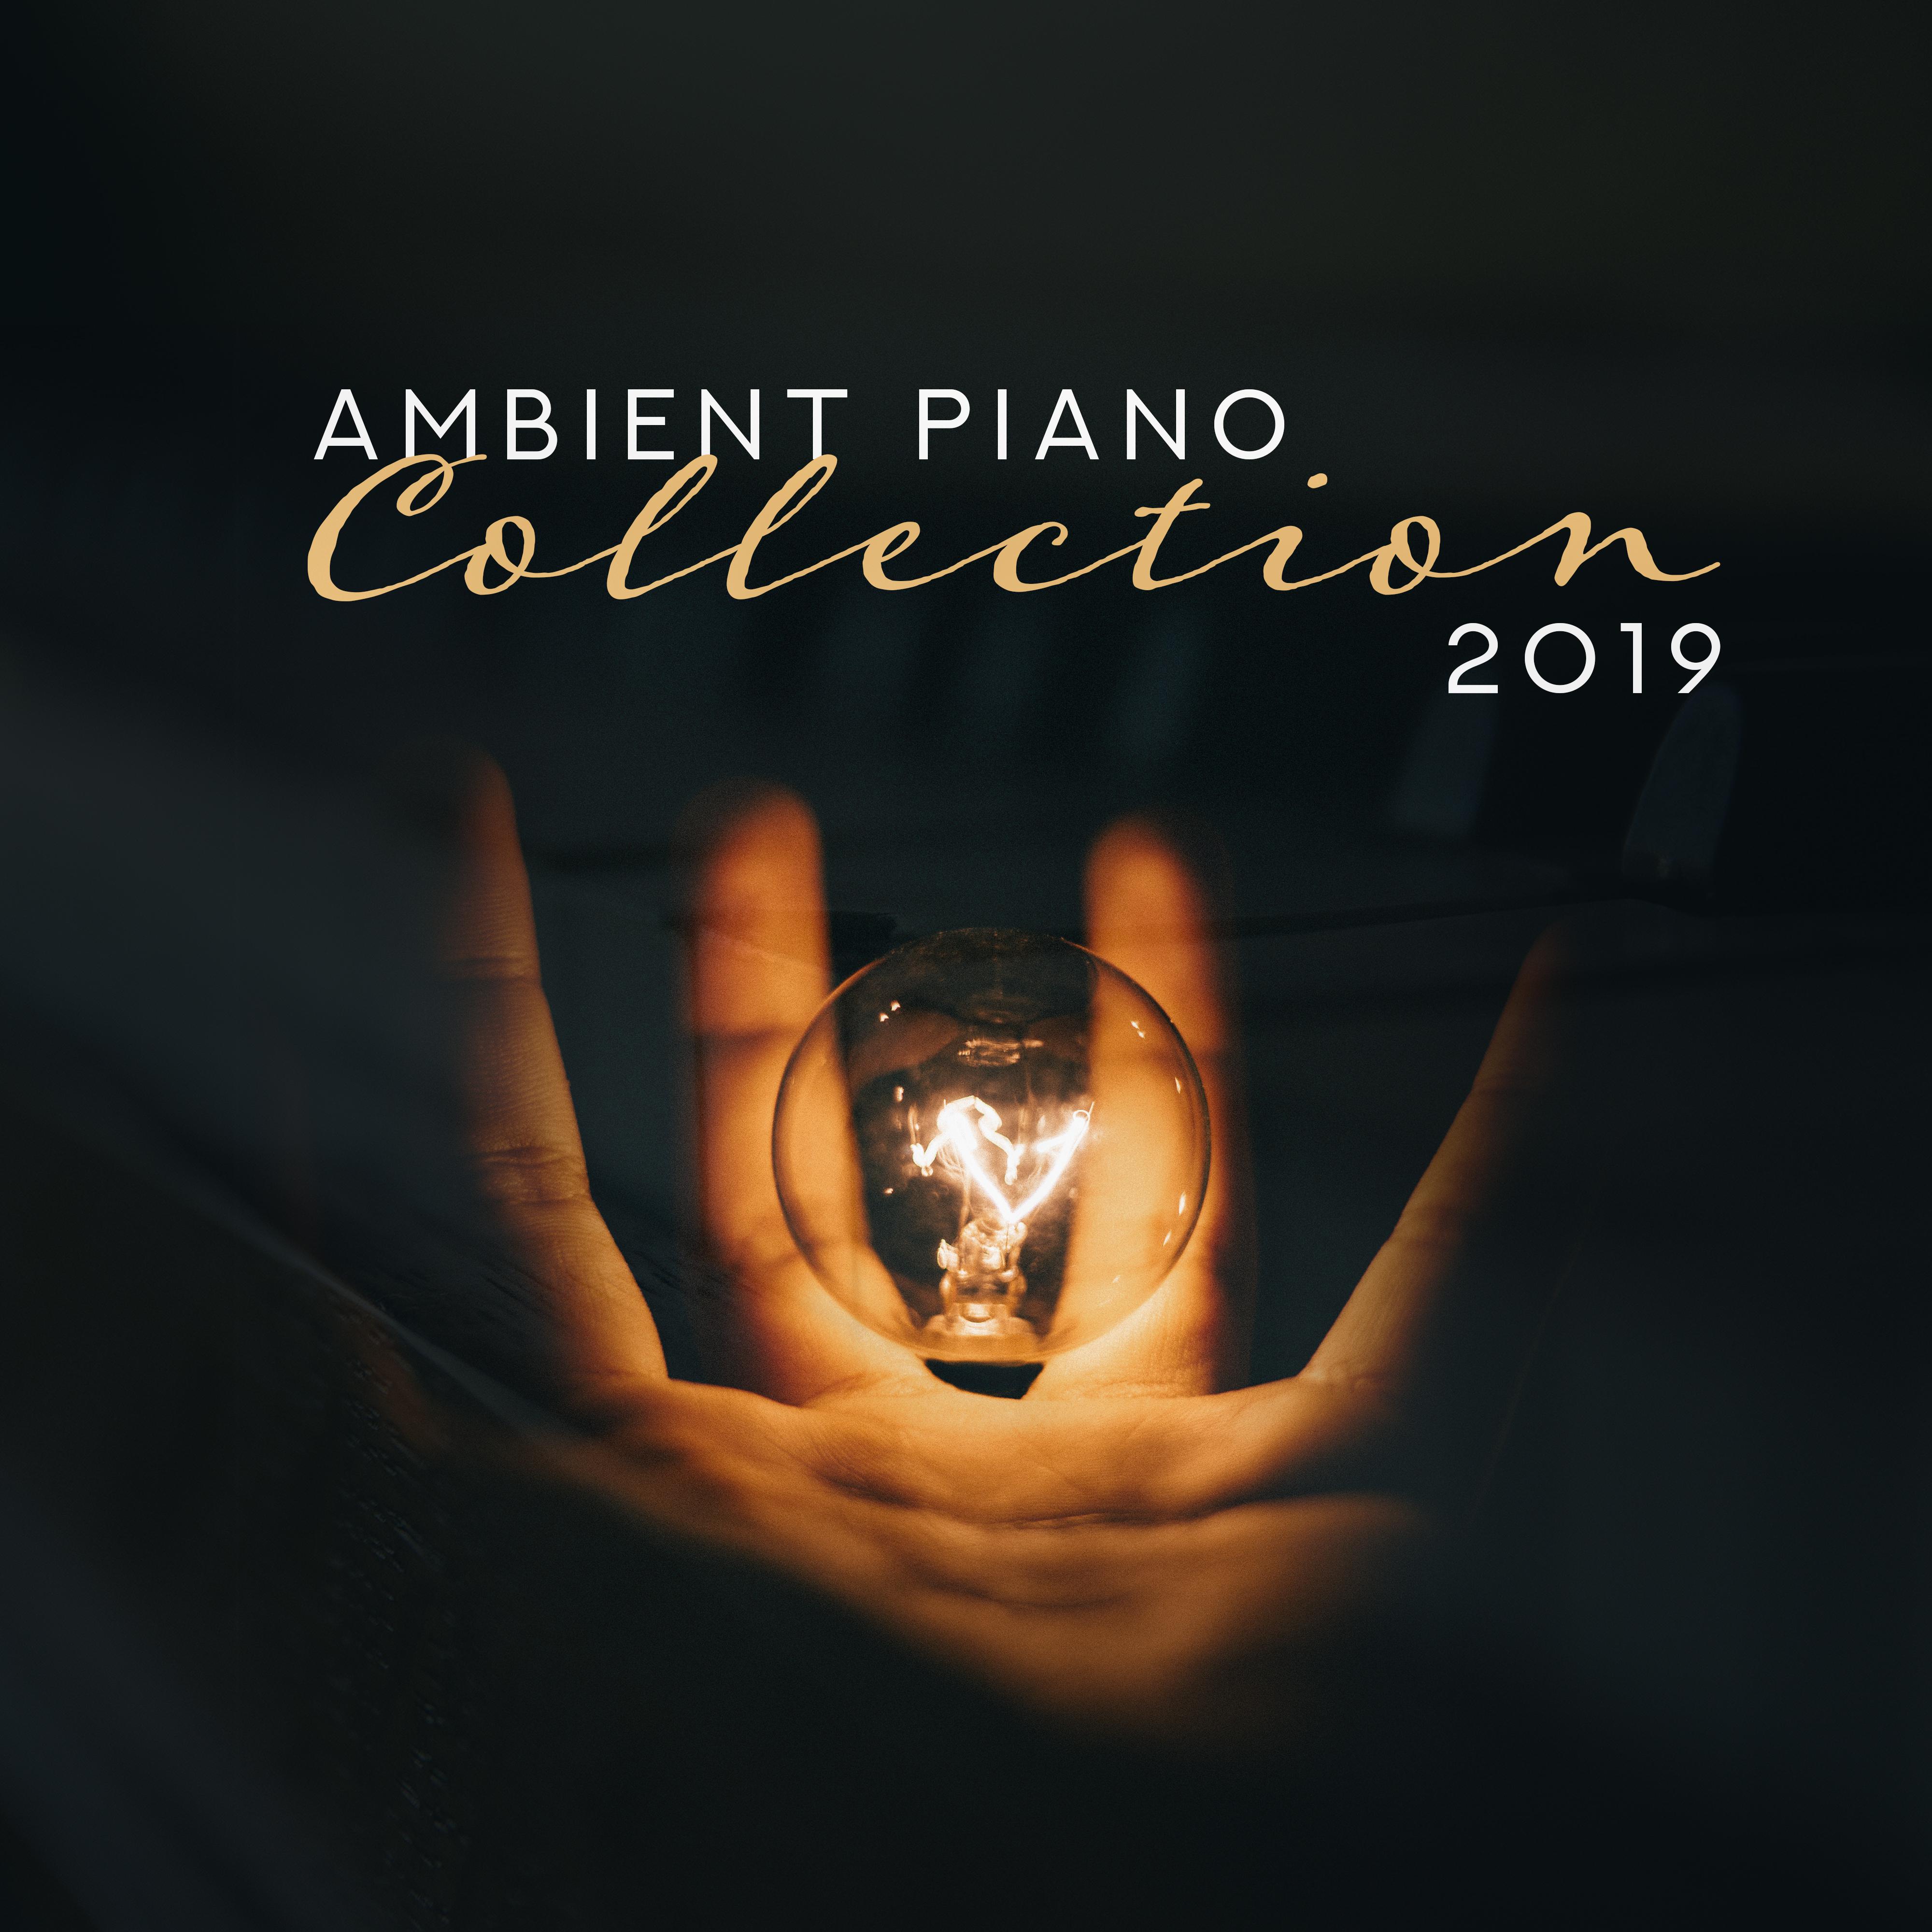 Ambient Piano Collection 2019  Gentle Piano Music, Relaxing Jazz, Beautiful Sounds of Piano to Rest, Jazz Music Ambient, Smooth Jazz